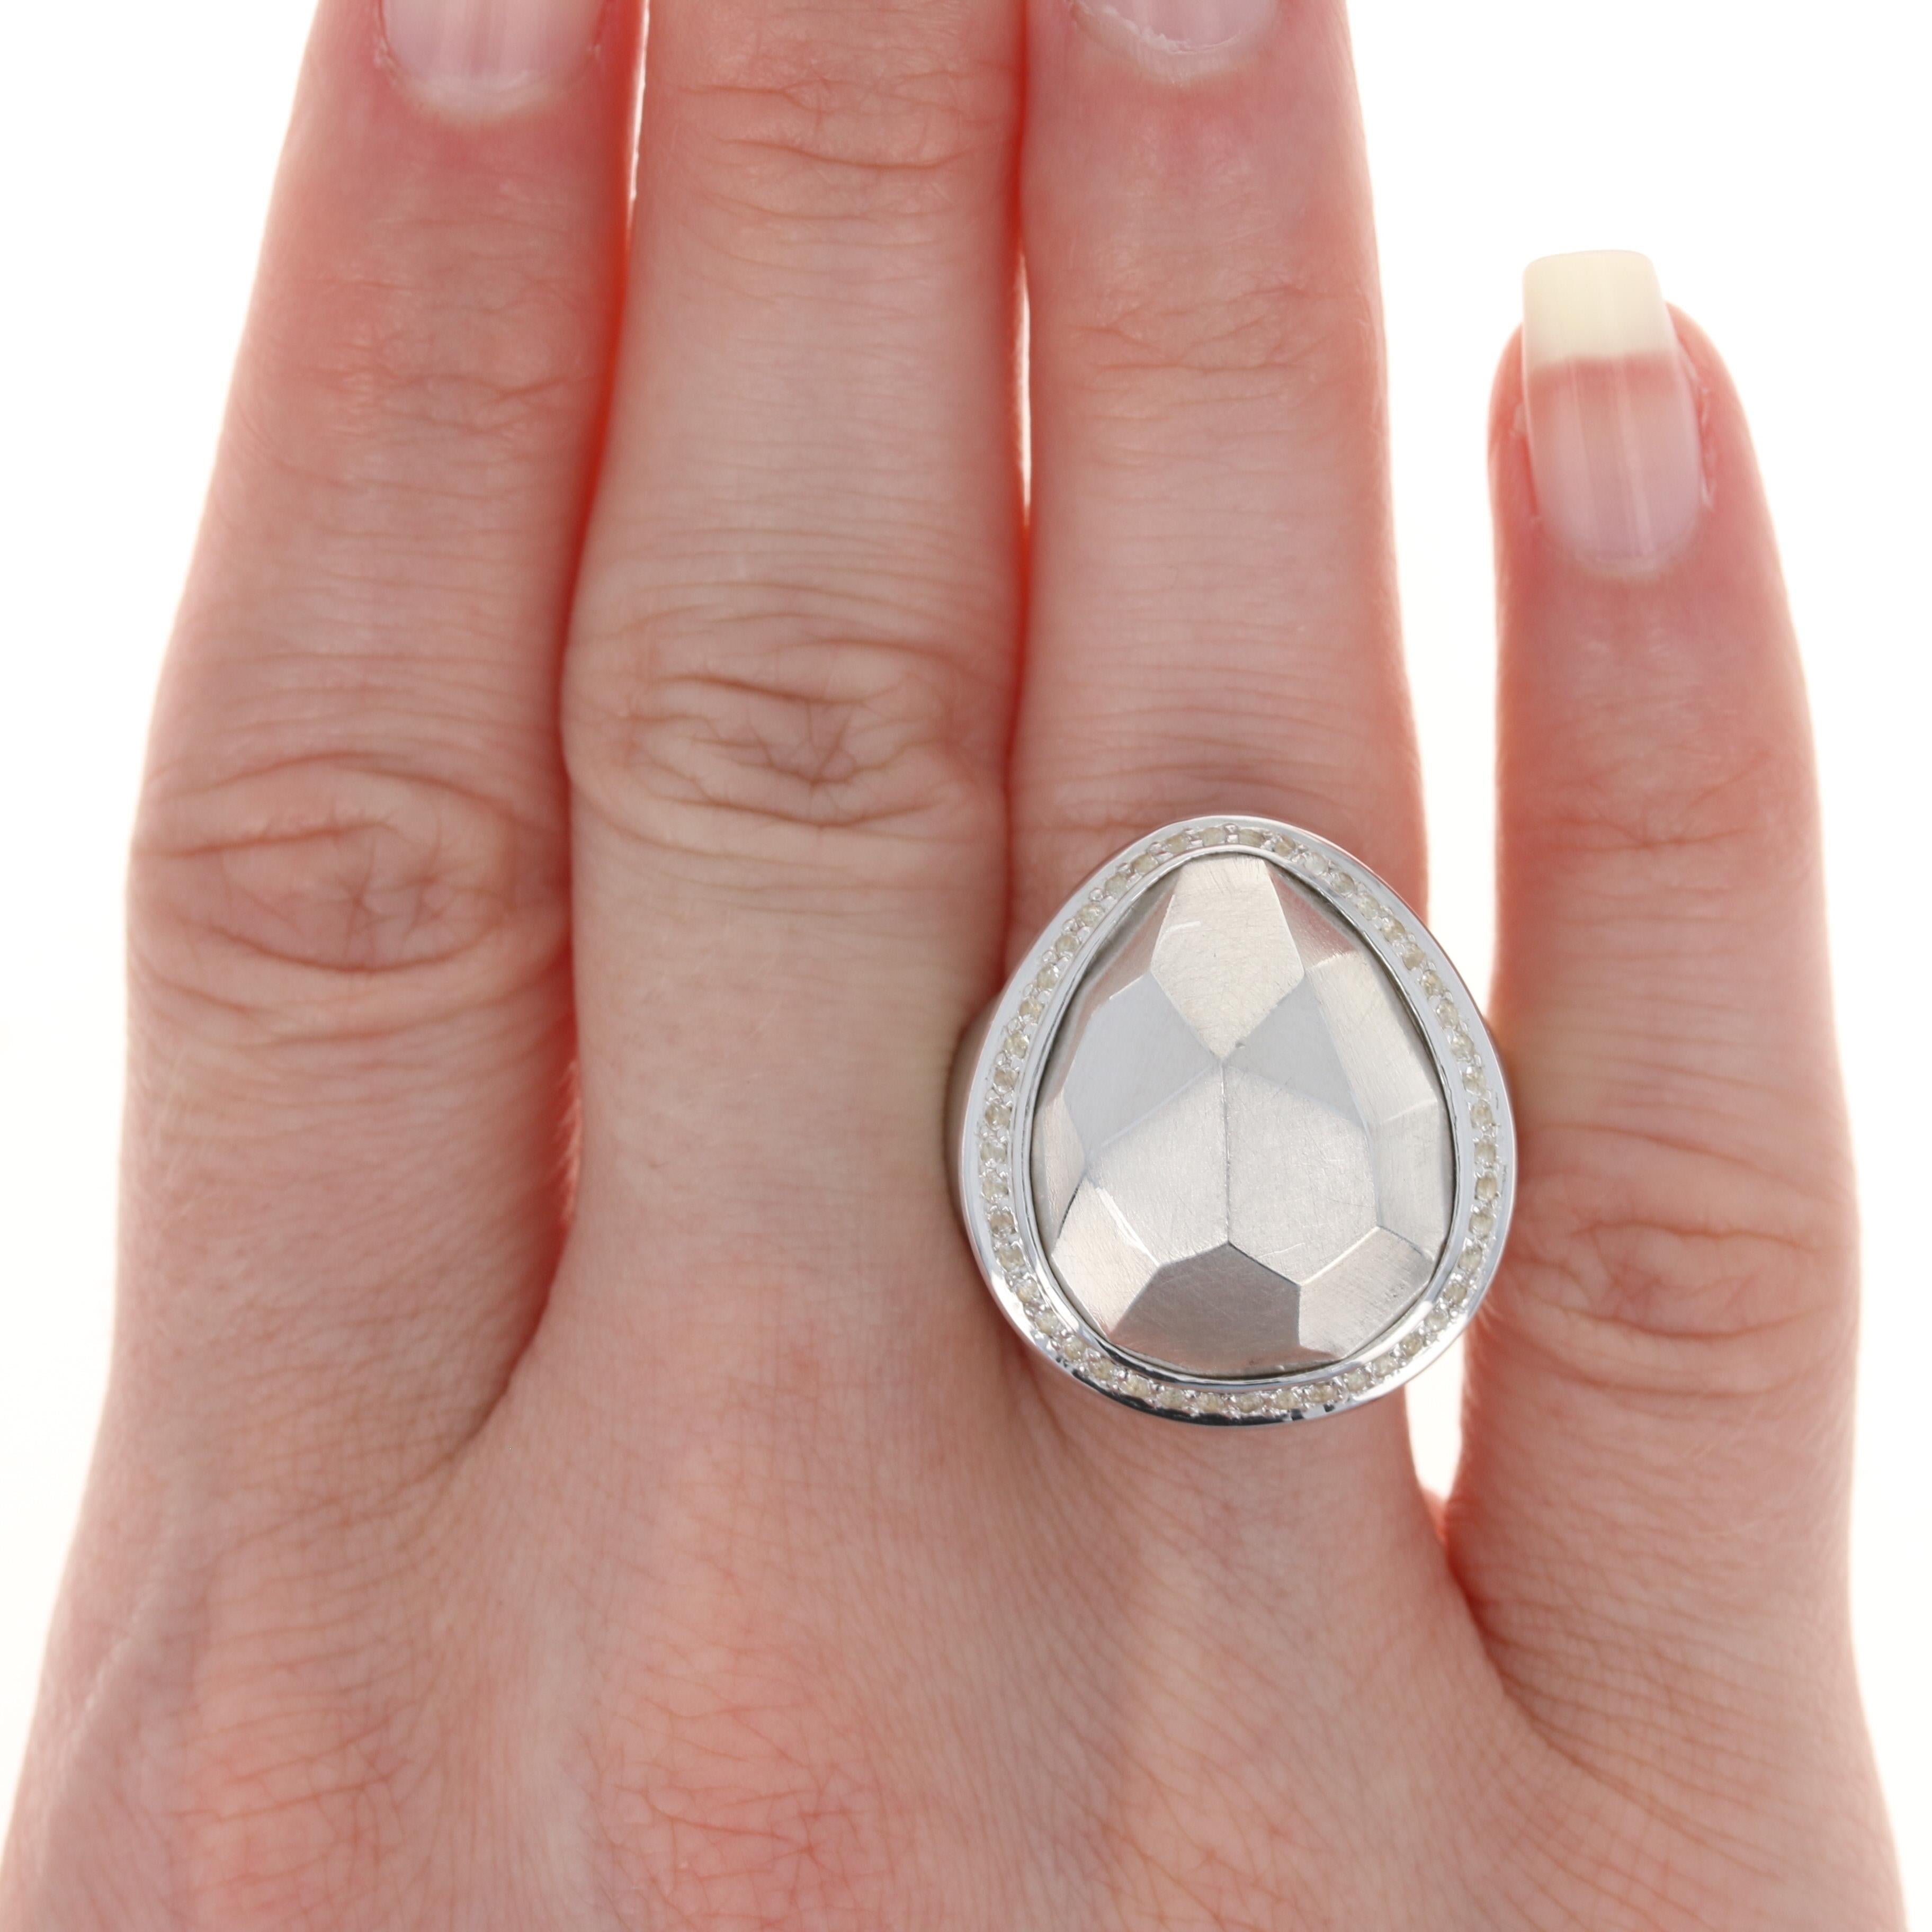 This ring retails at $400
This ring is a size 7 1/2. Please contact for additional sizing options.
Metal Content: Sterling Silver
Finish: Brushed
Stone: White Topaz Halo
Face Height (north to south): 31/32